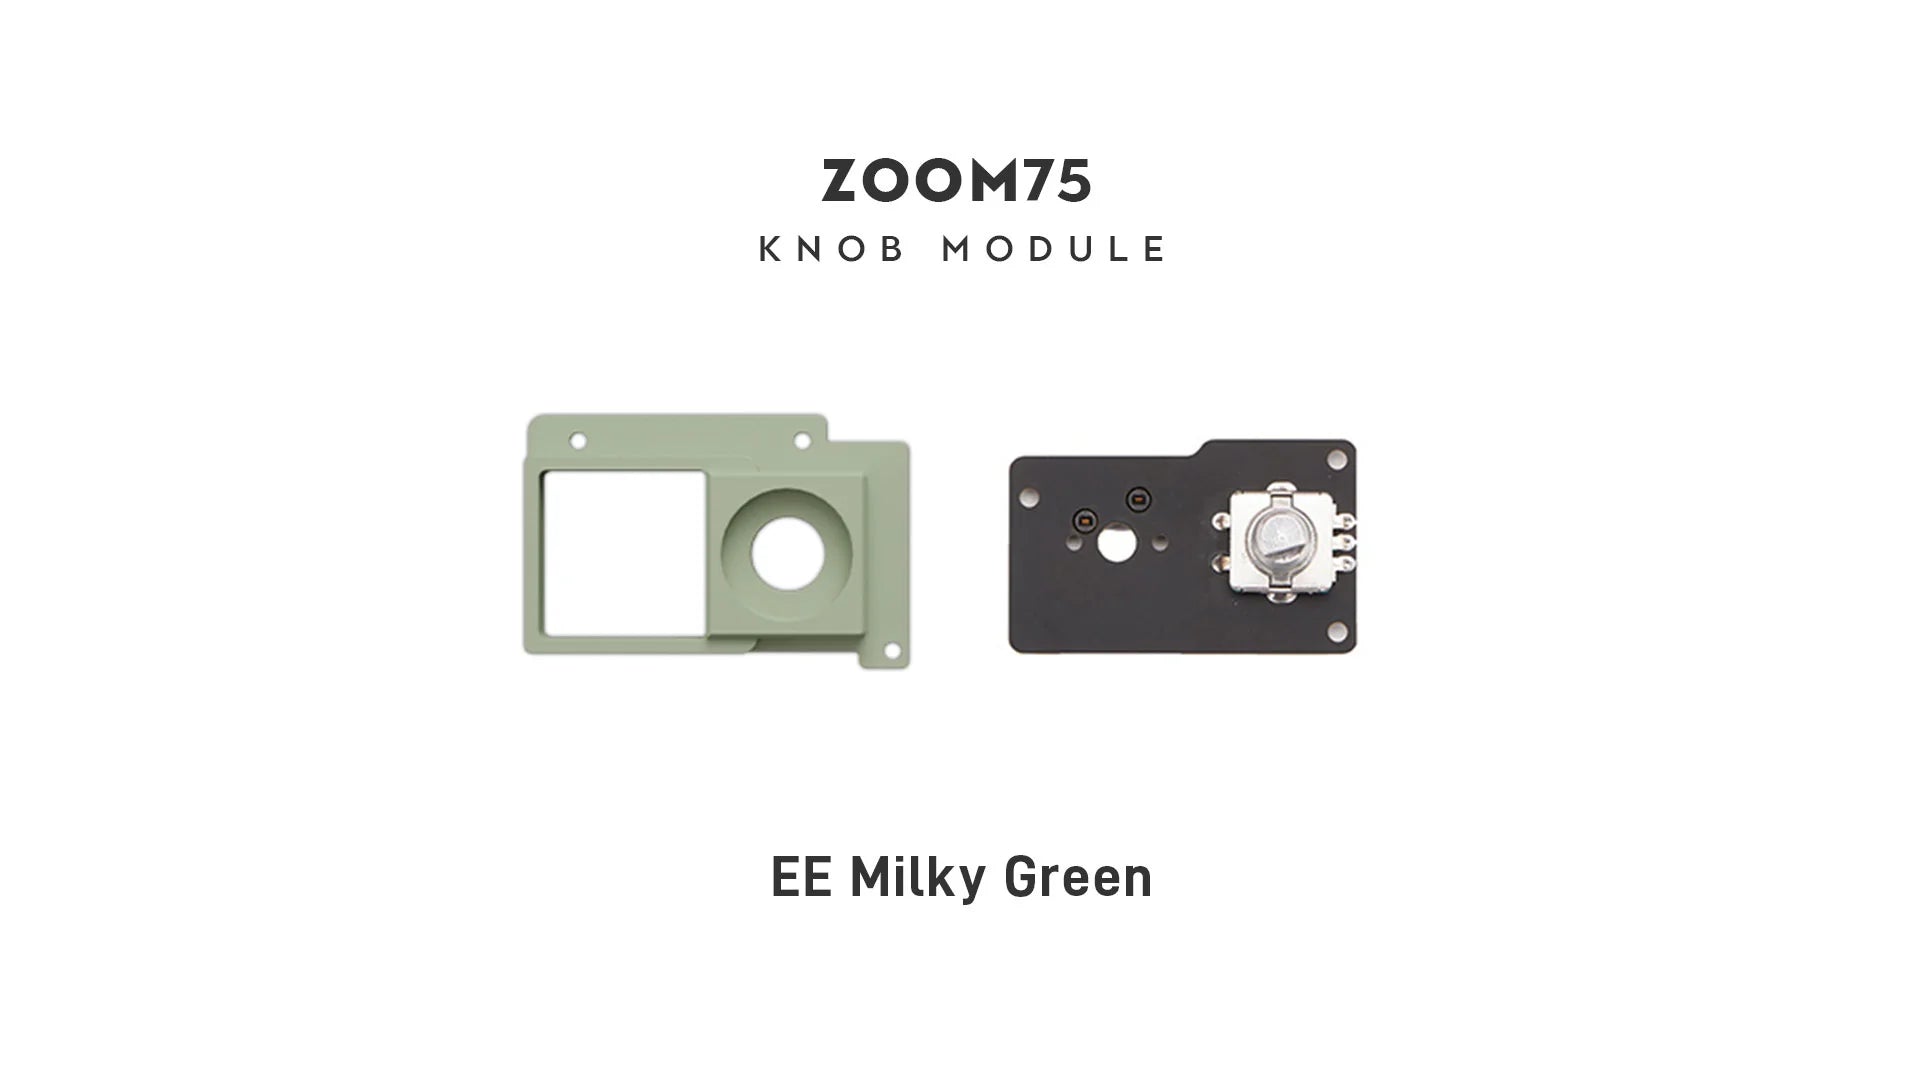 Zoom75 Modules [Preorder]